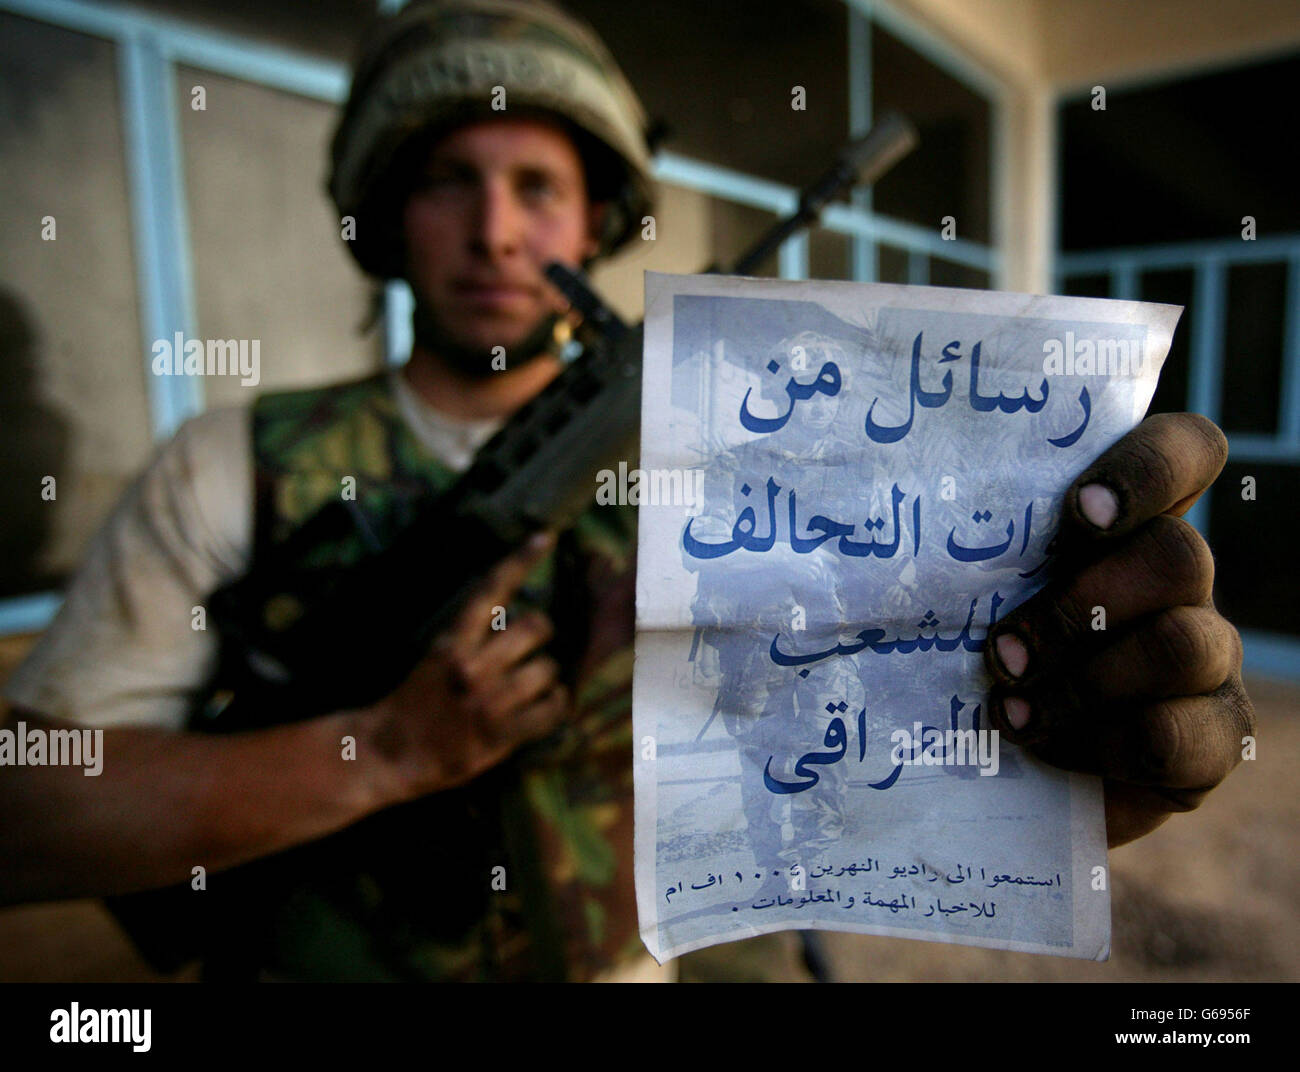 A British soldier holds a leaflet in Arabic issued to British troops telling potential Iraqi prisoners of war how to act. Concerns have been raised that the British Army has few translators able to converse with local Iraqi populations. Photo by Dan Chung, The Guardian, MOD Pool Stock Photo